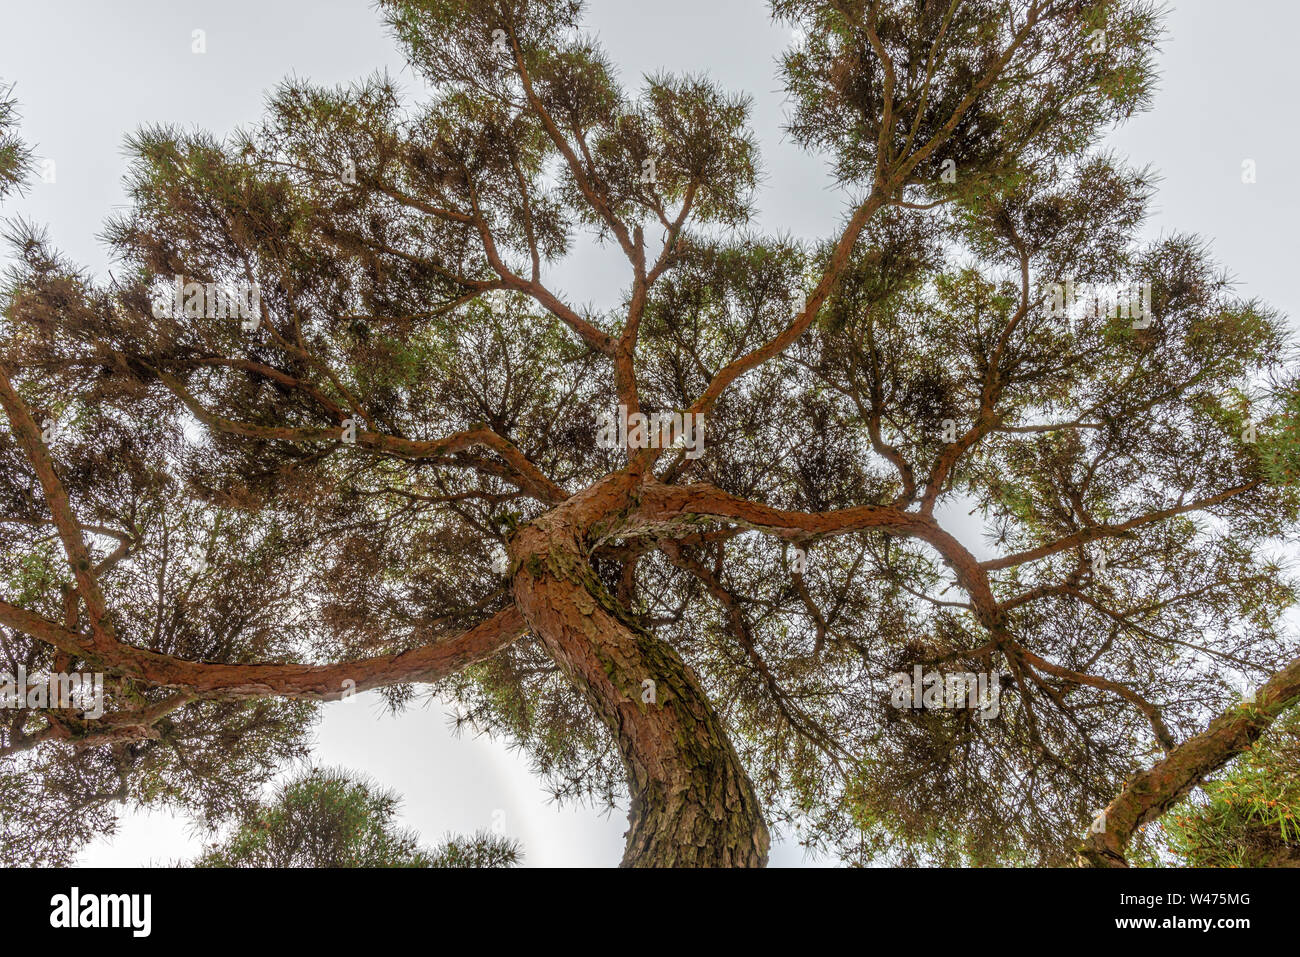 Japanese pine tree seen from bellow, taken during a summer afternoon in Gyeongju, South Korea Stock Photo